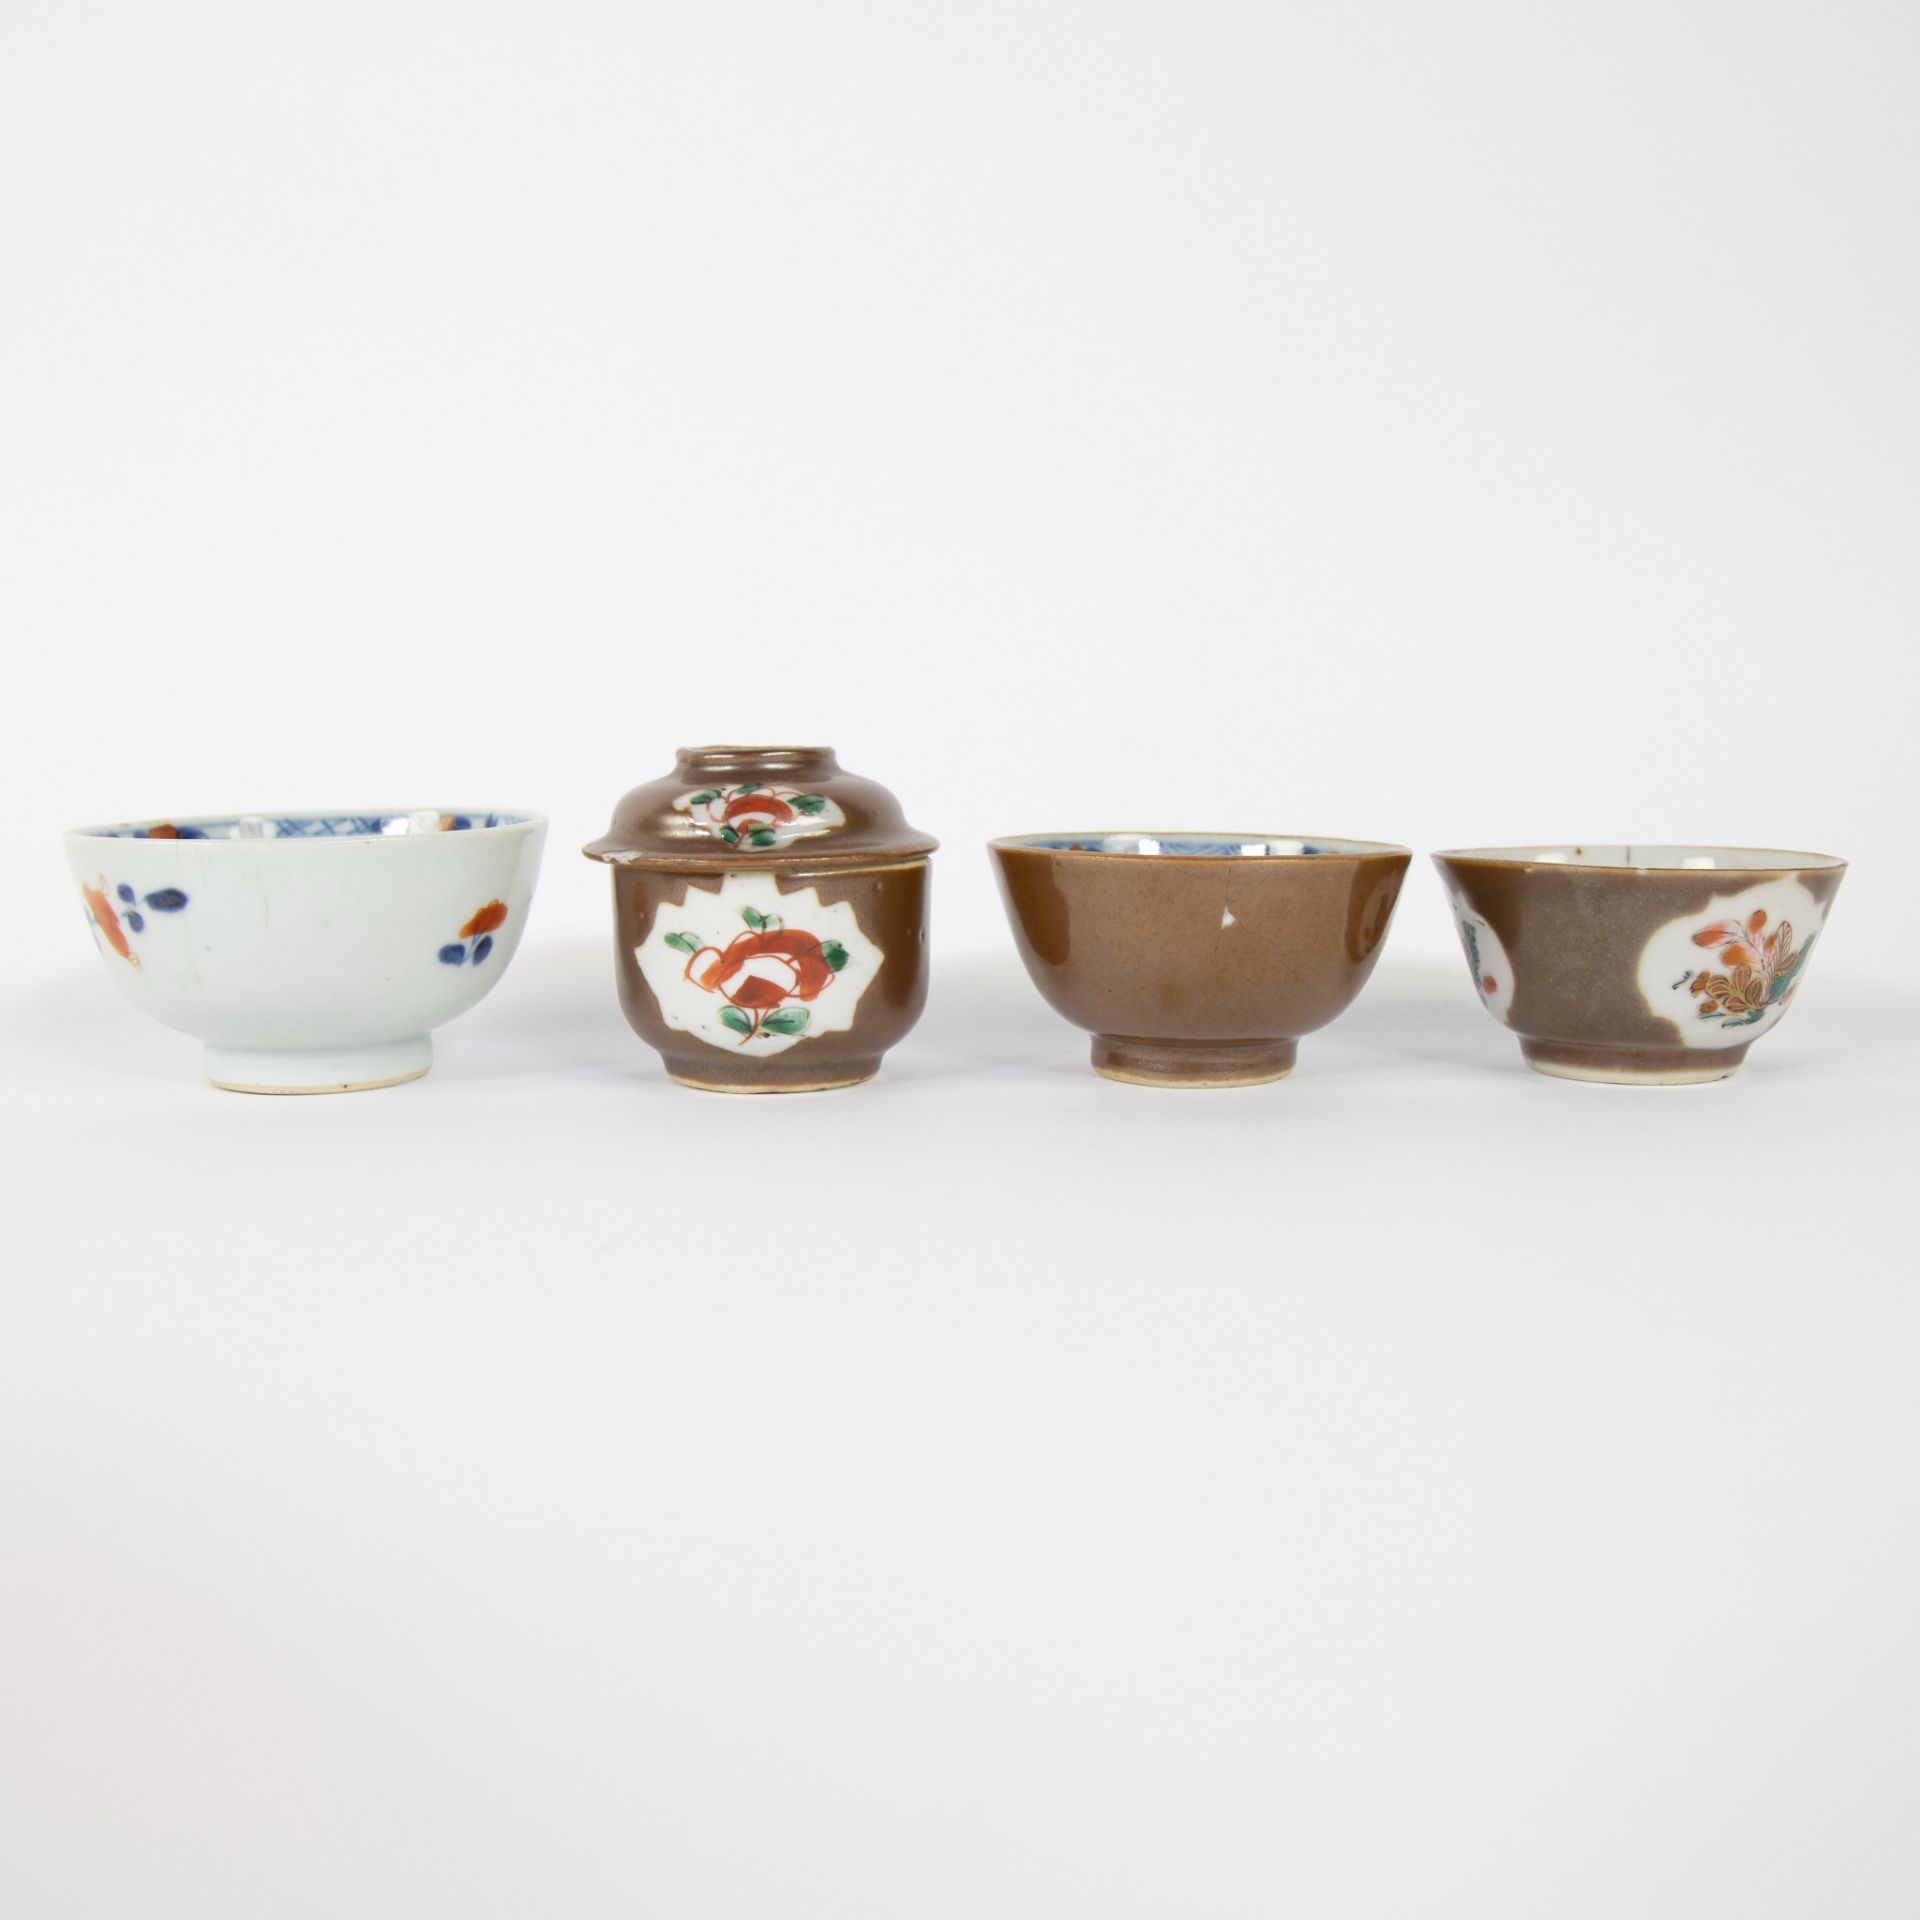 A set of Chinese batavia brown cups and saucers, one Imari cup and 2 plates blue/white, 18th C. - Image 6 of 11